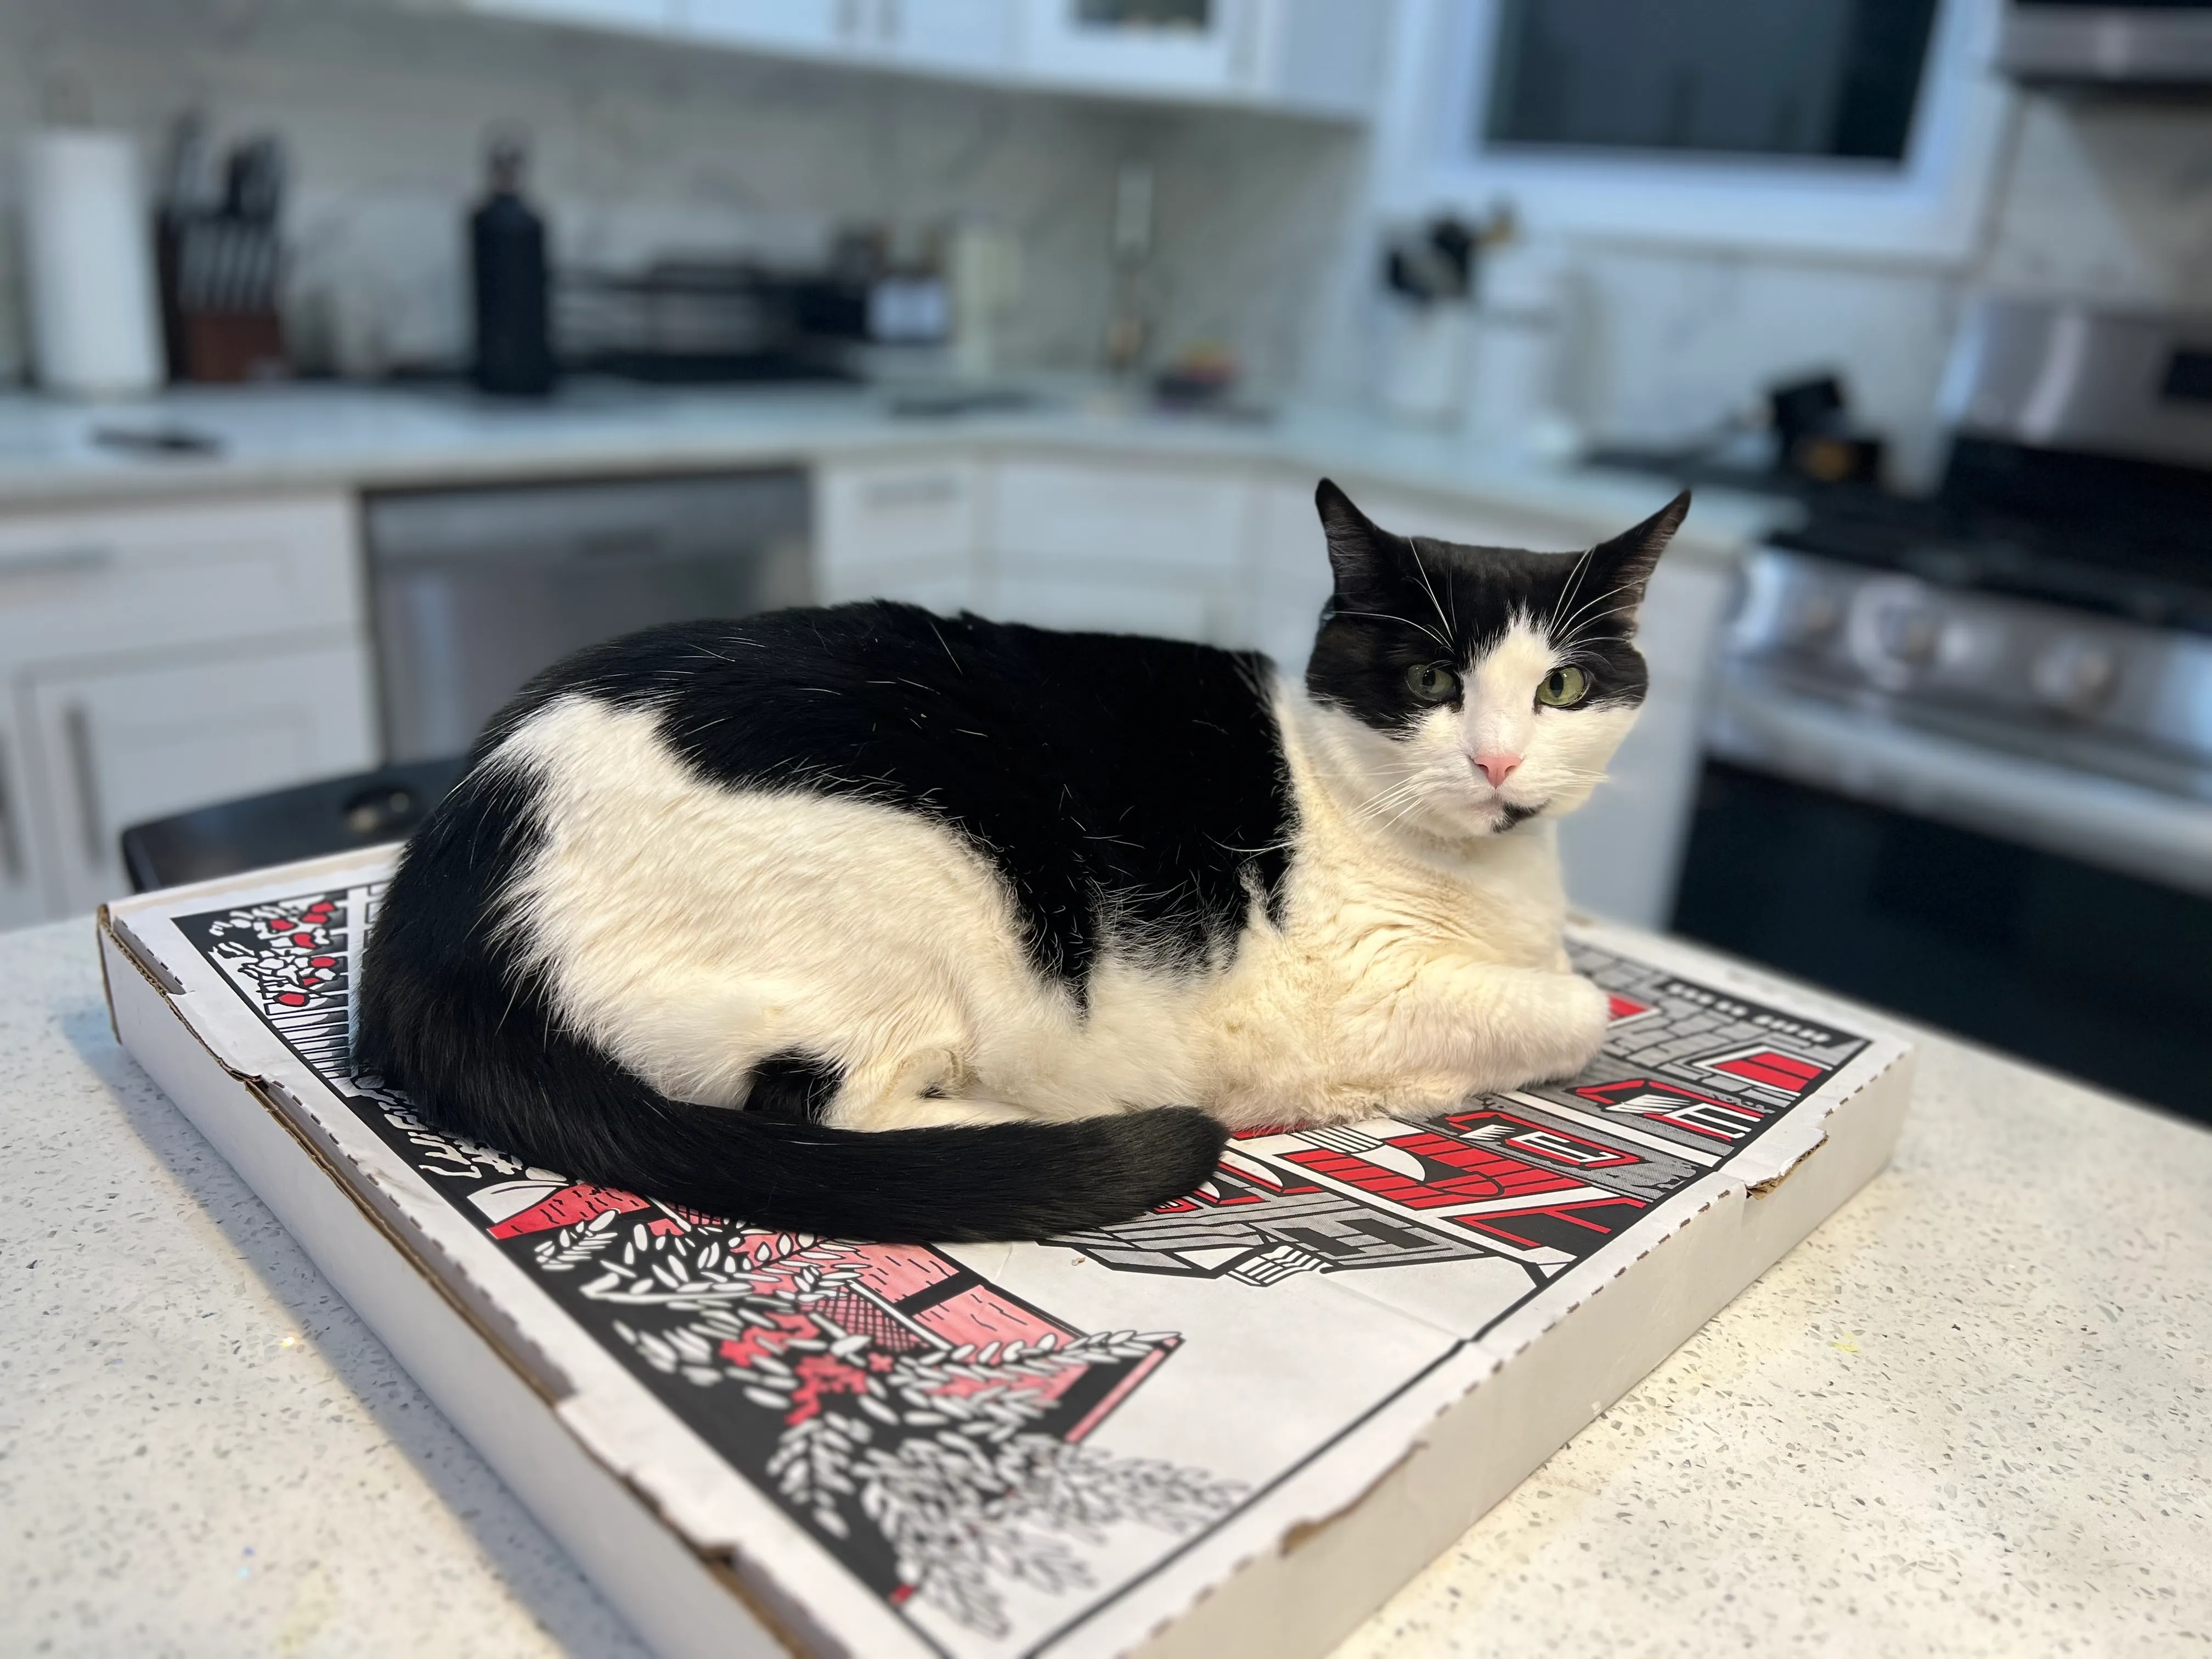 Ori is staring at the photographer from atop the pizza box.